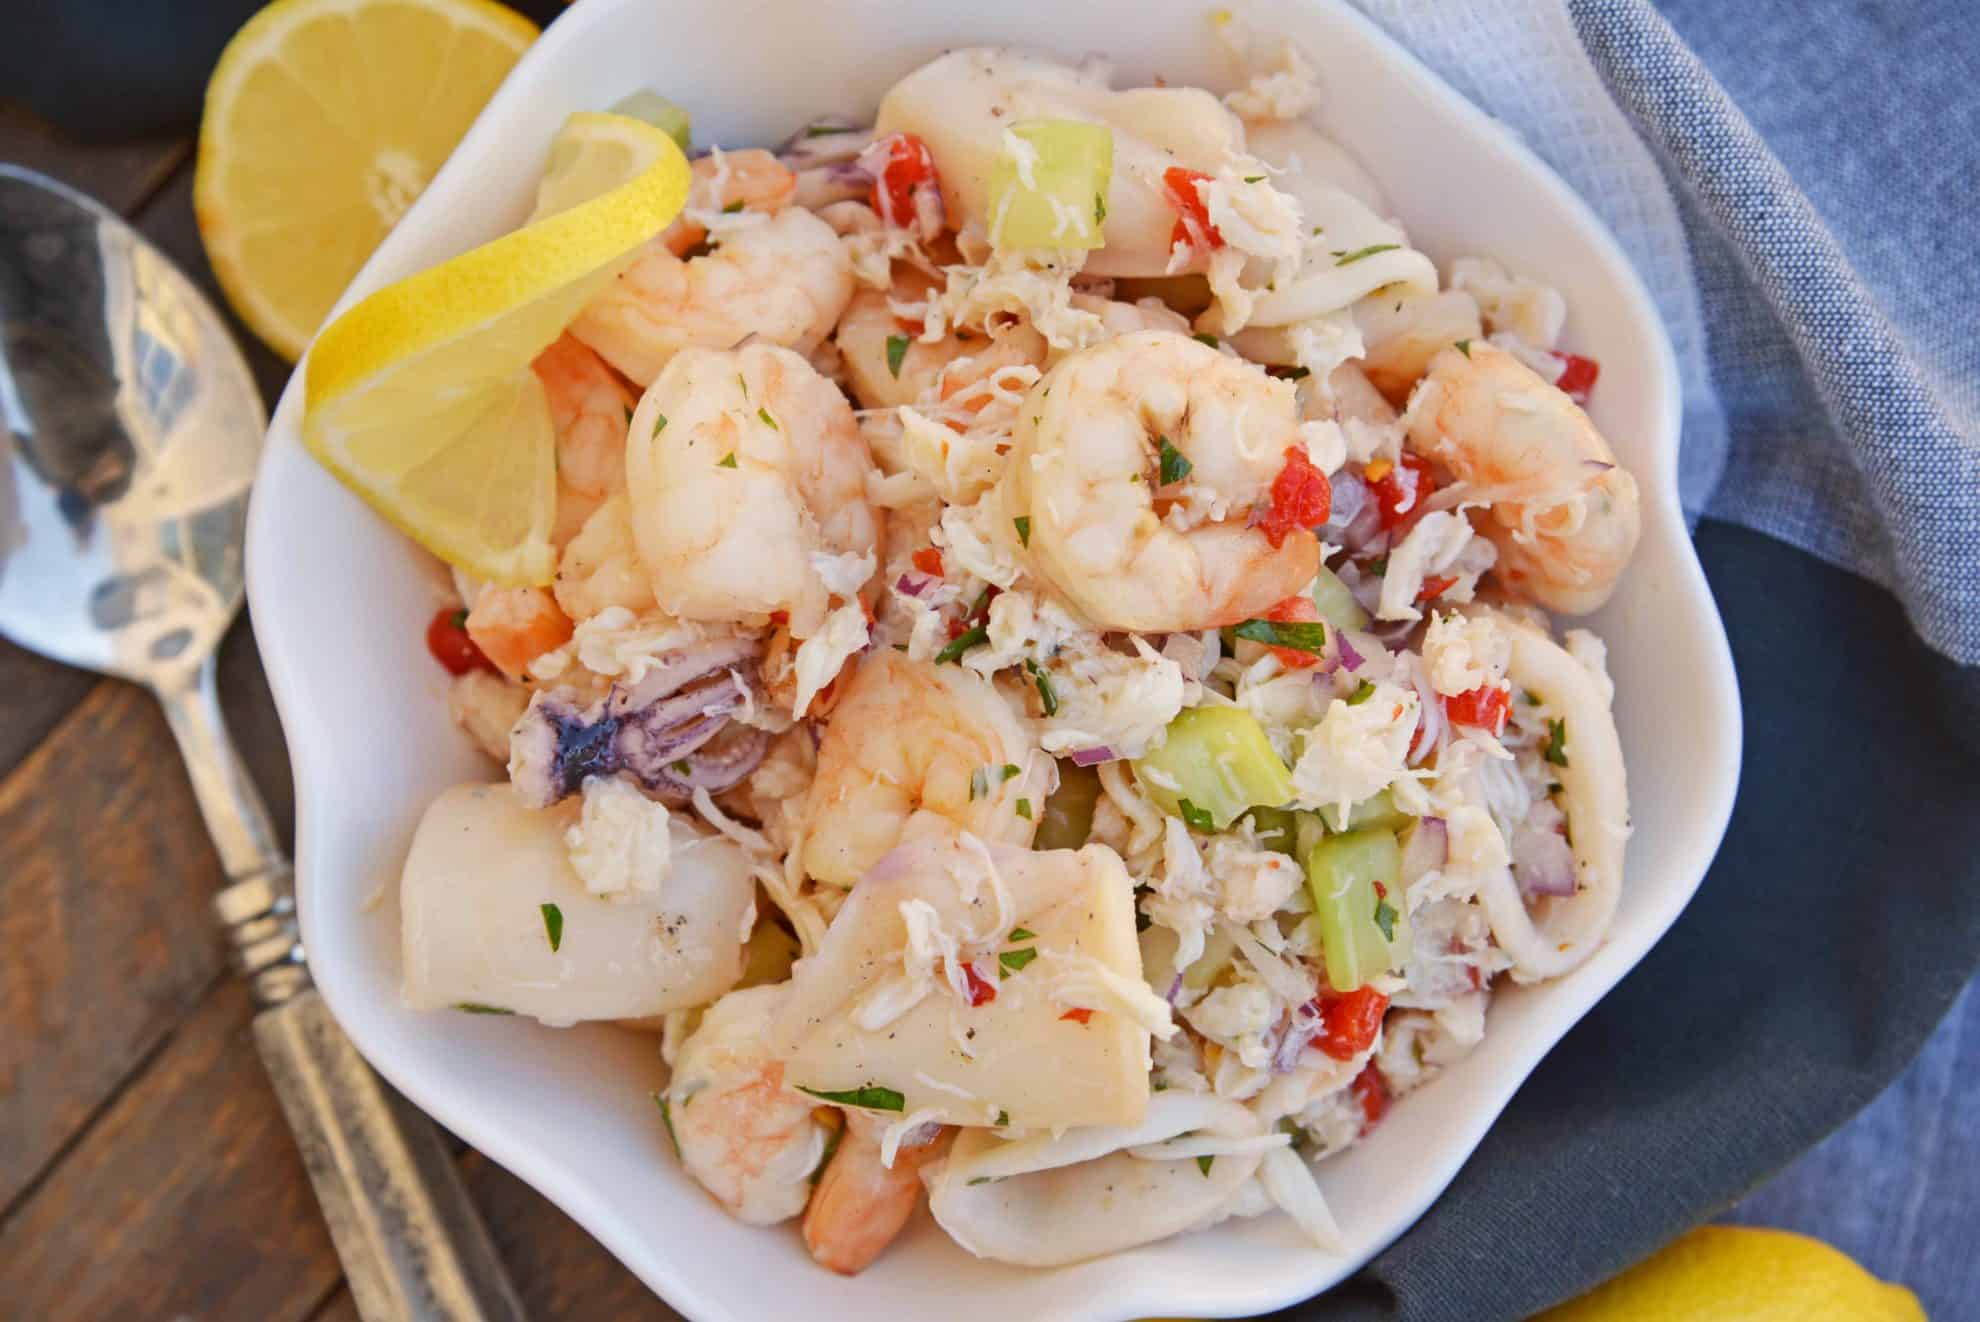 This Italian Seafood Salad, made with shrimp, calamari and lump crab meat, is one of the best and easiest seafood salad recipes you'll ever try.  #seafoodsalad #italianseafoodsalad www.savoryexperiments.com